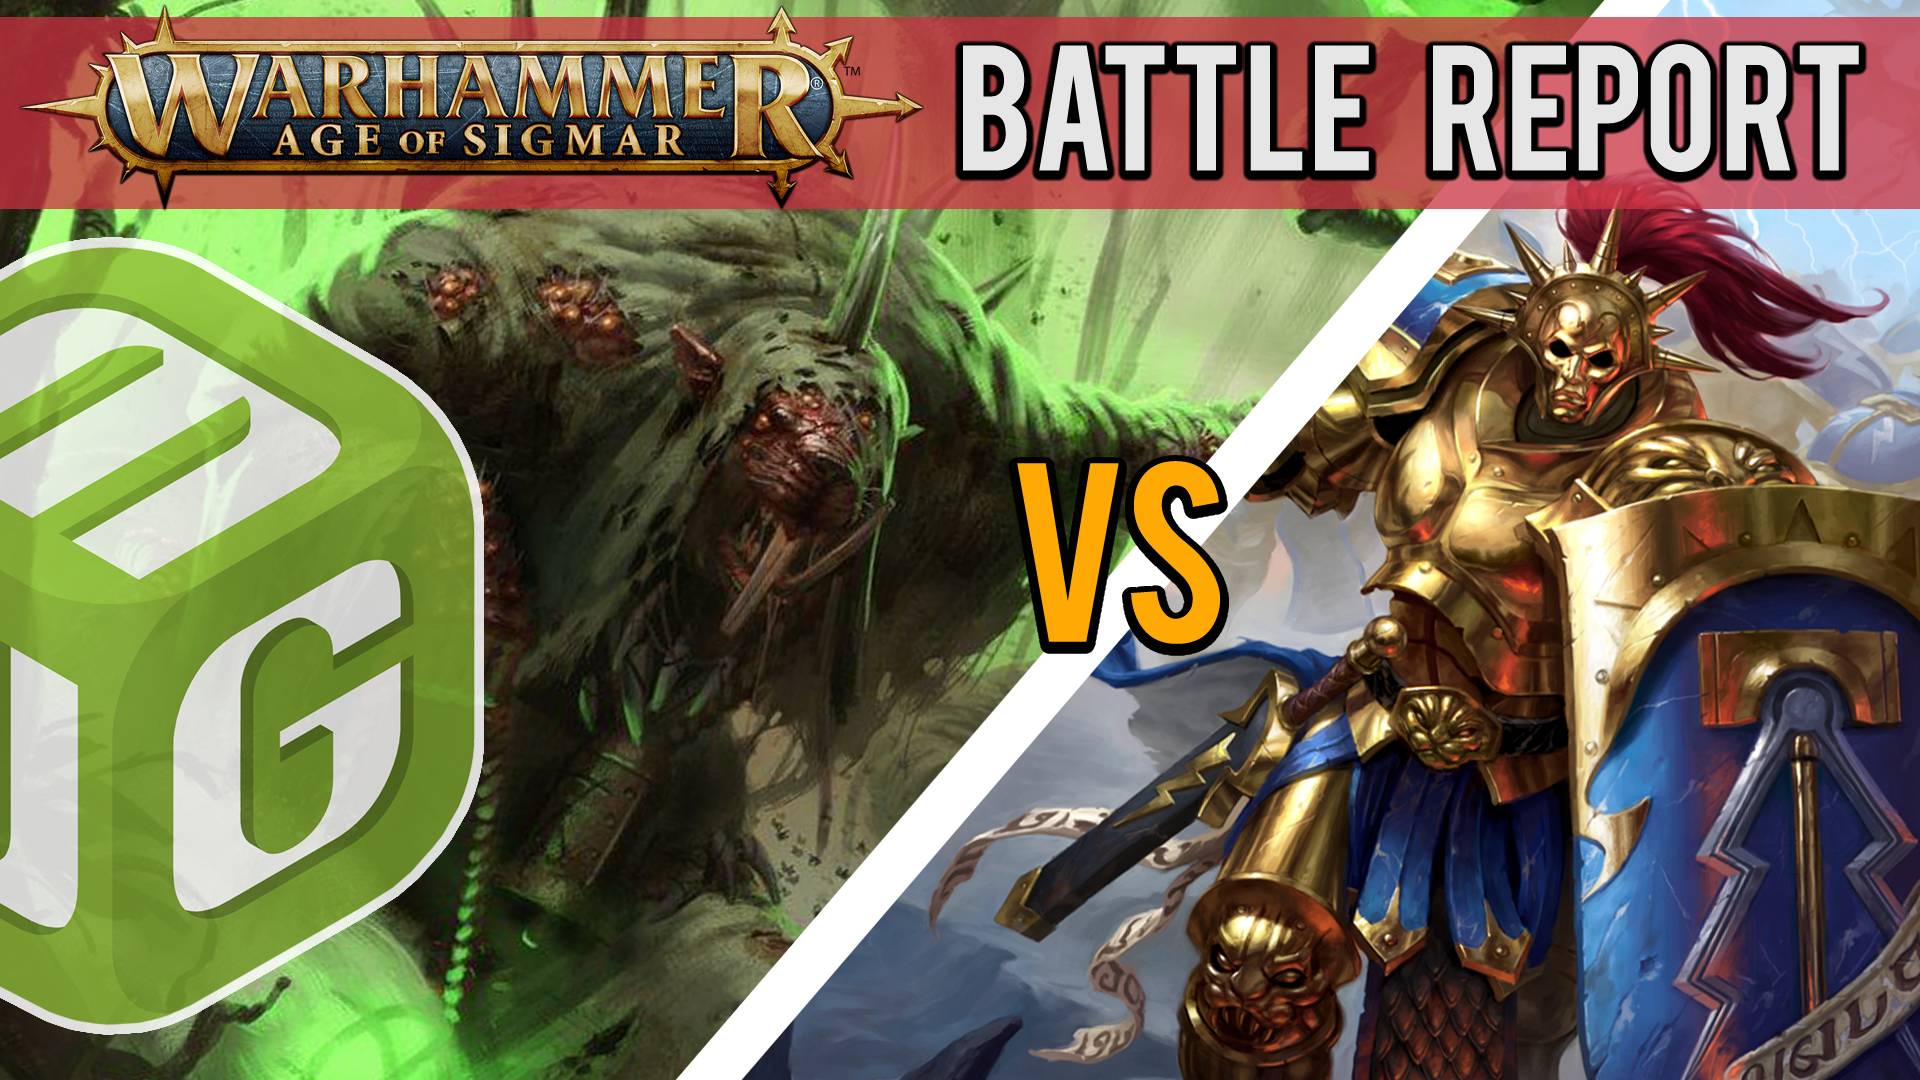 Army Lists for Skaven vs Stormcast Eternals Warhammer Age of Sigmar 3rd Edition Battle Report Ep 200